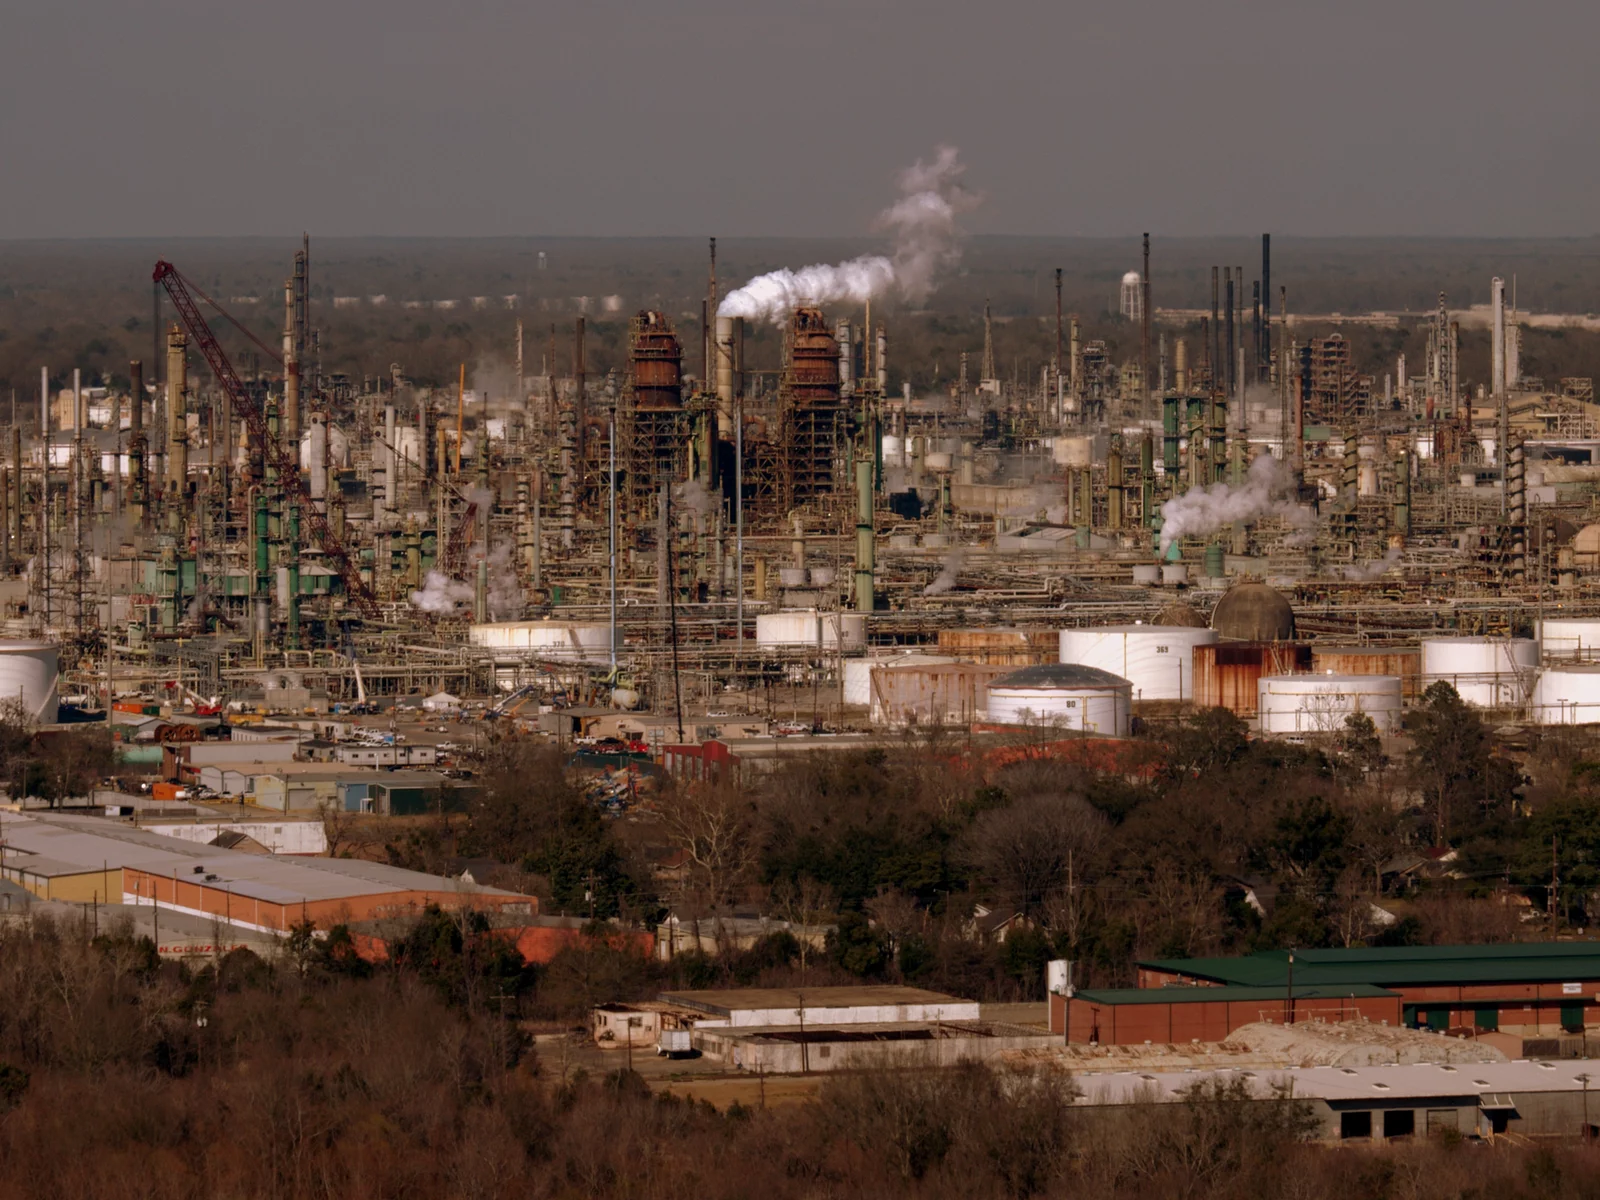 A U.S. federal agency is suing Exxon after 5 nooses were found at a Louisiana complex